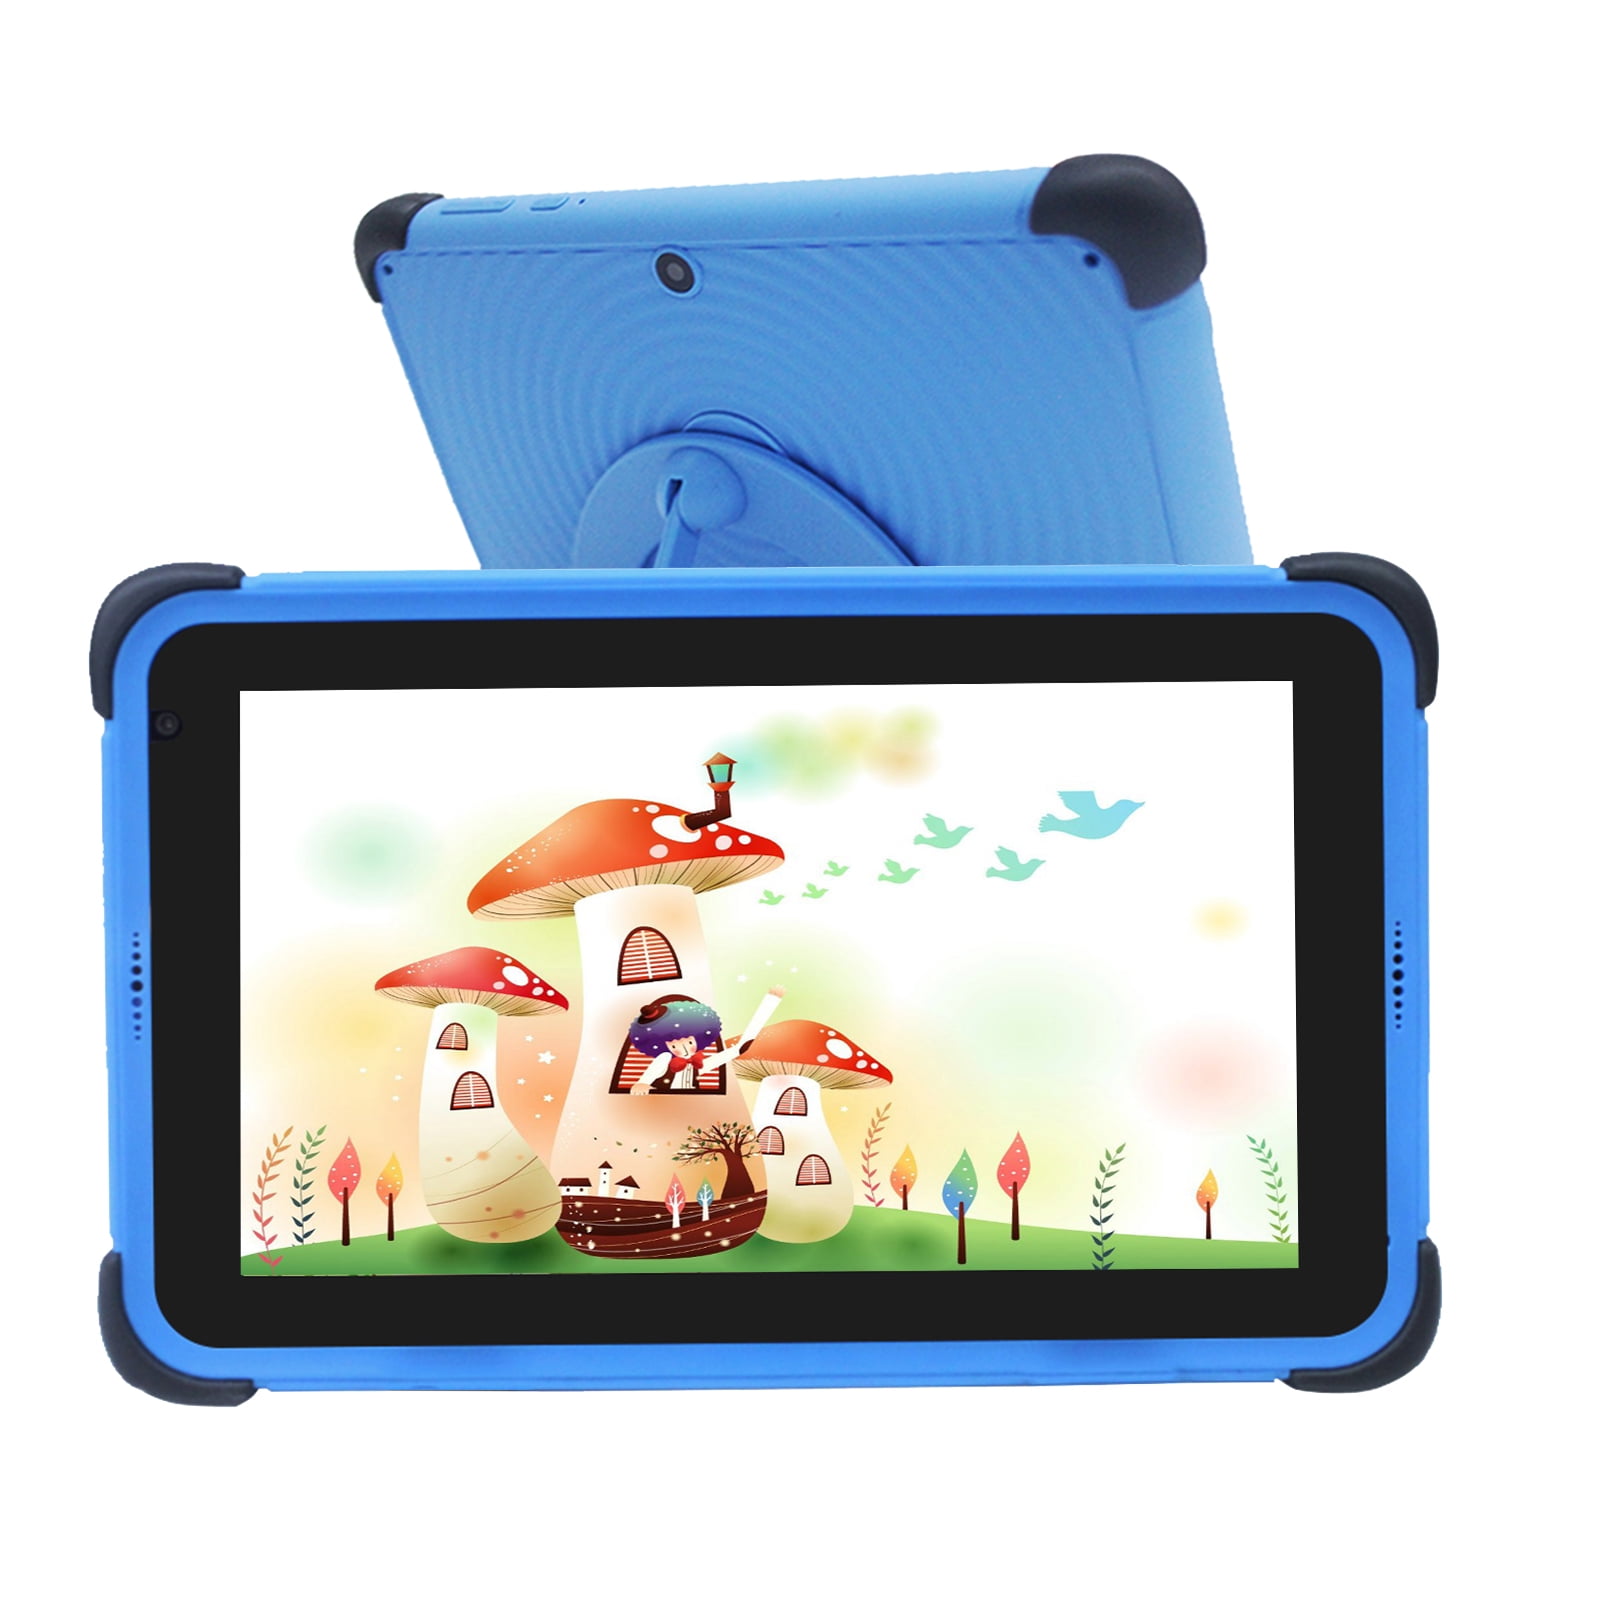 Kids Tablet 7 inch Android 11 32GB COPPA Certified Children's Learning ...